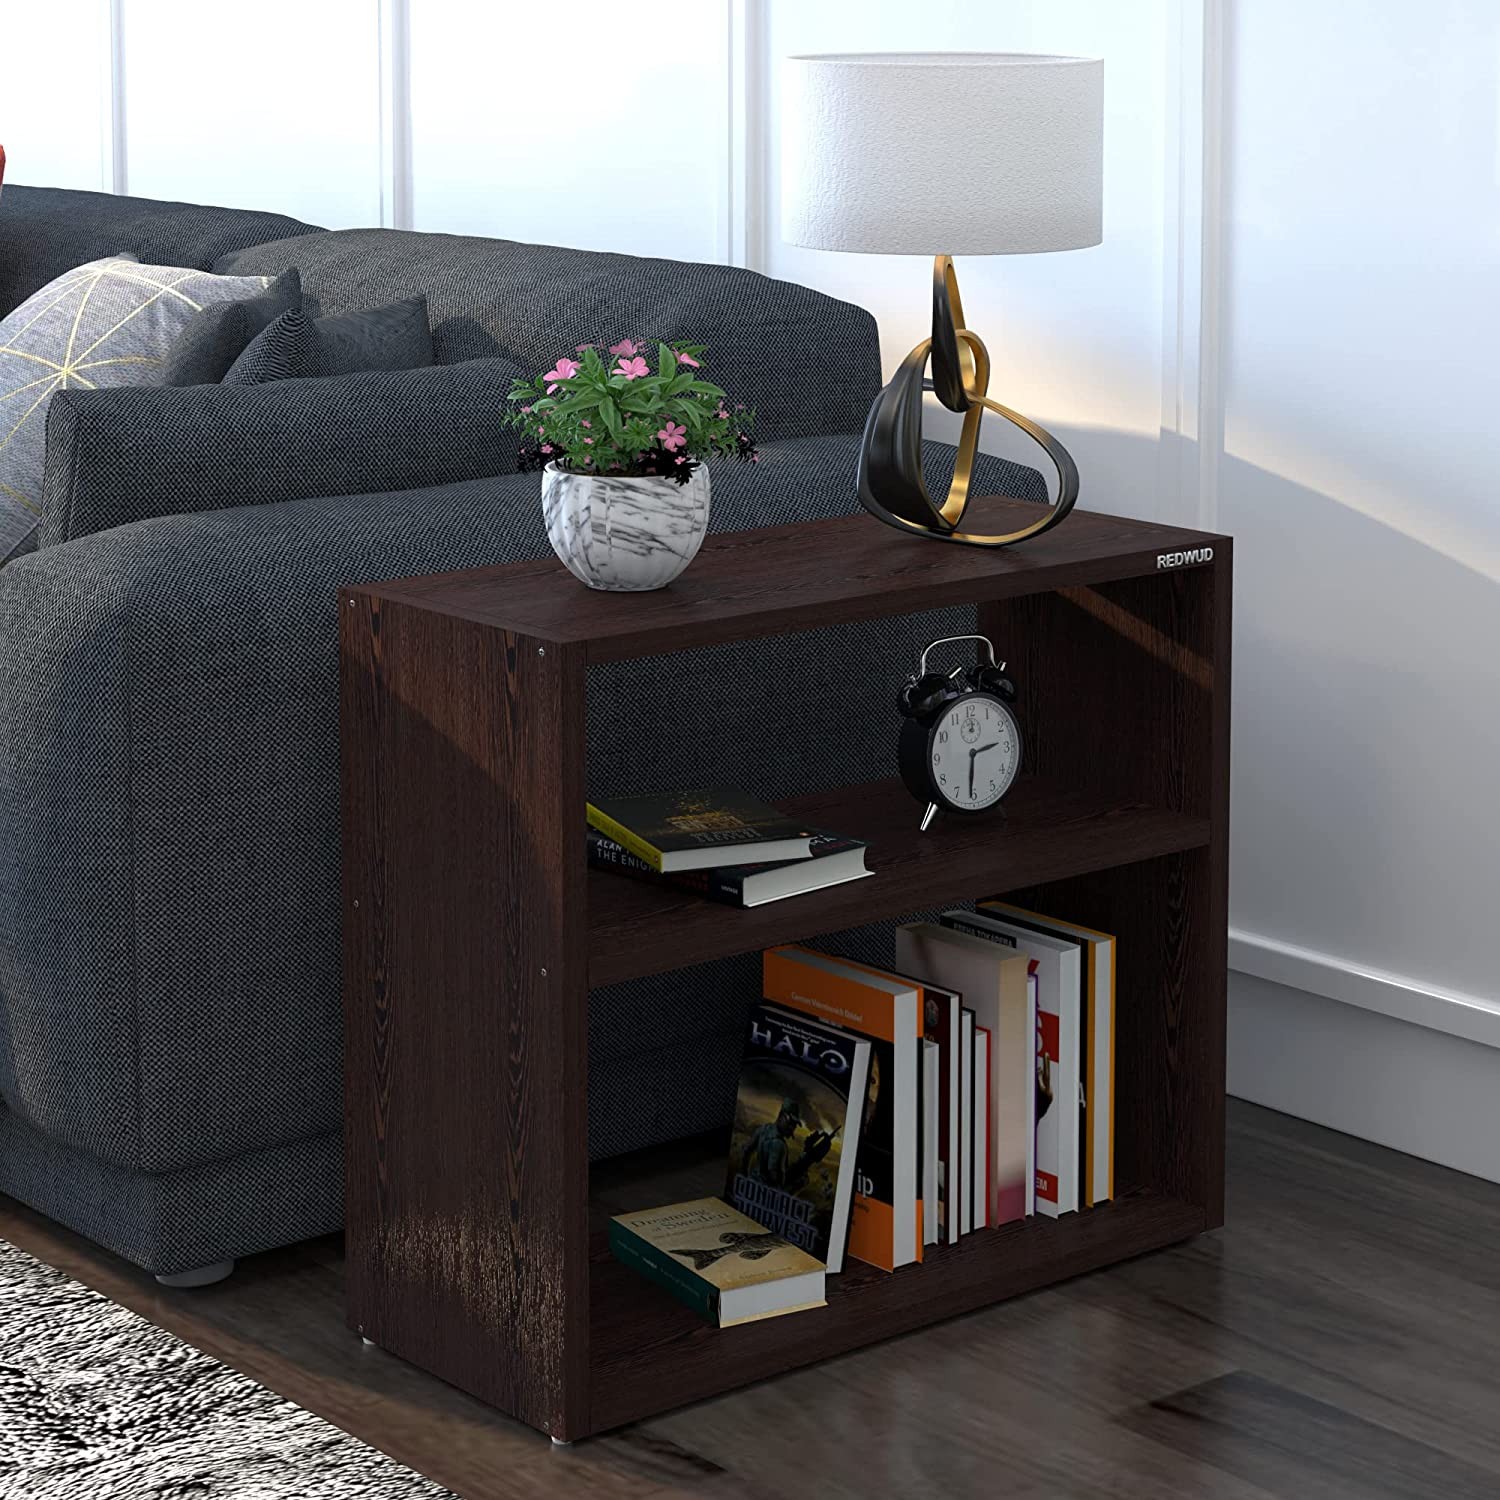 patricia-engineered-wood-bedside-table-end-table-wenge-rd-patricia-w